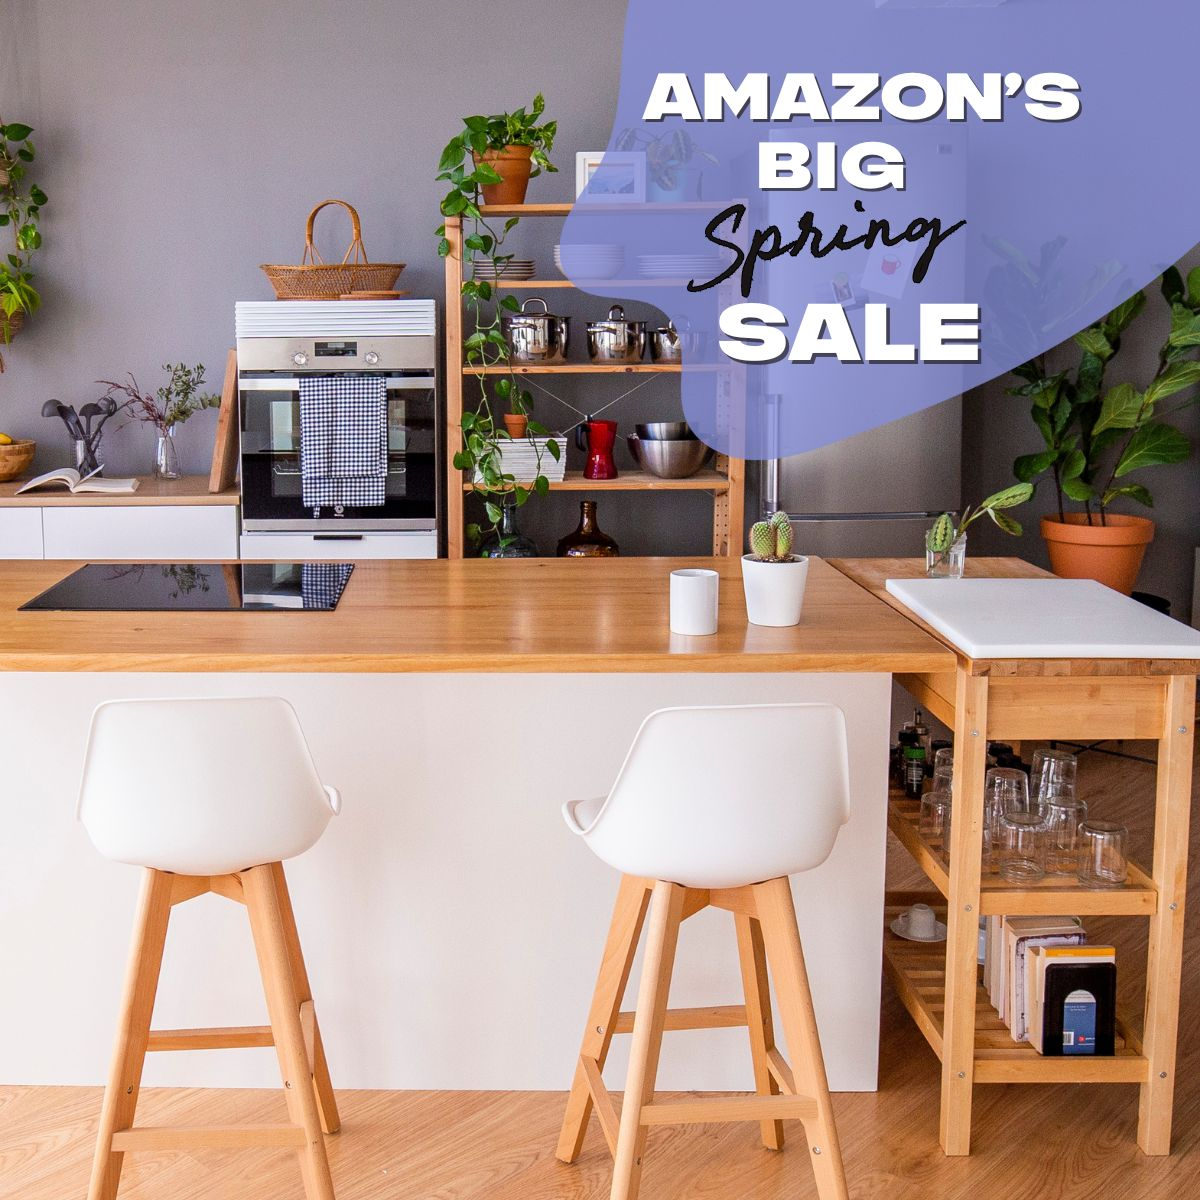 Save up to 50% on Gadgets & Gizmos Aplenty from Amazon’s Big Sale